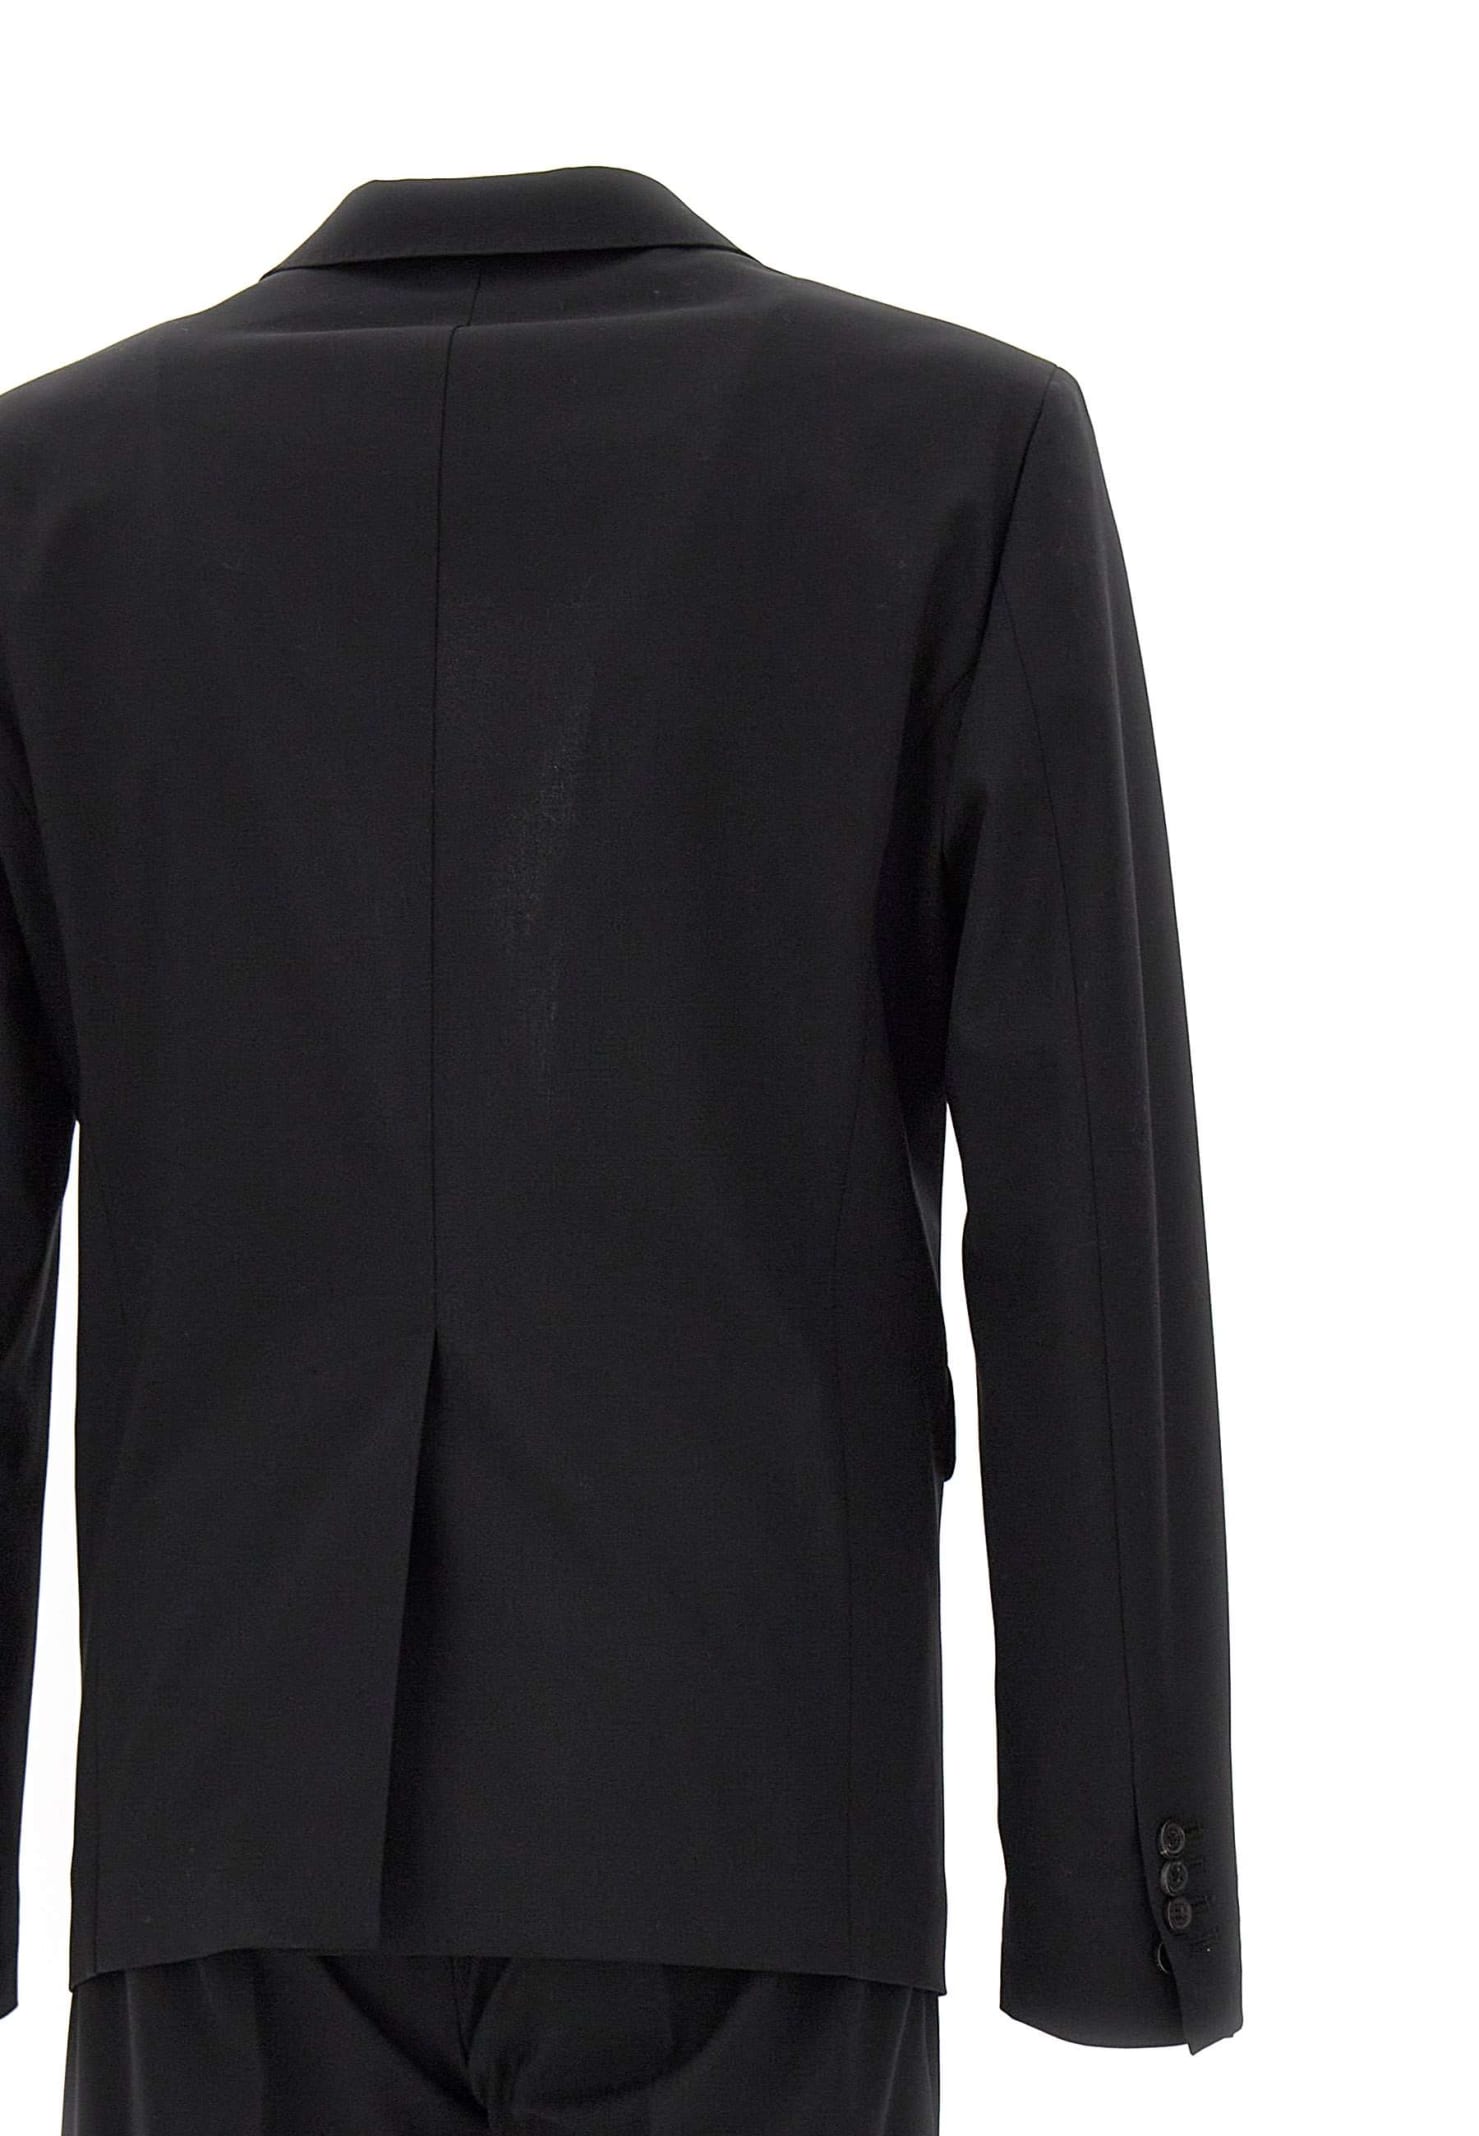 Dsquared2 Tokyo Suit Cool Wool Suit In Black